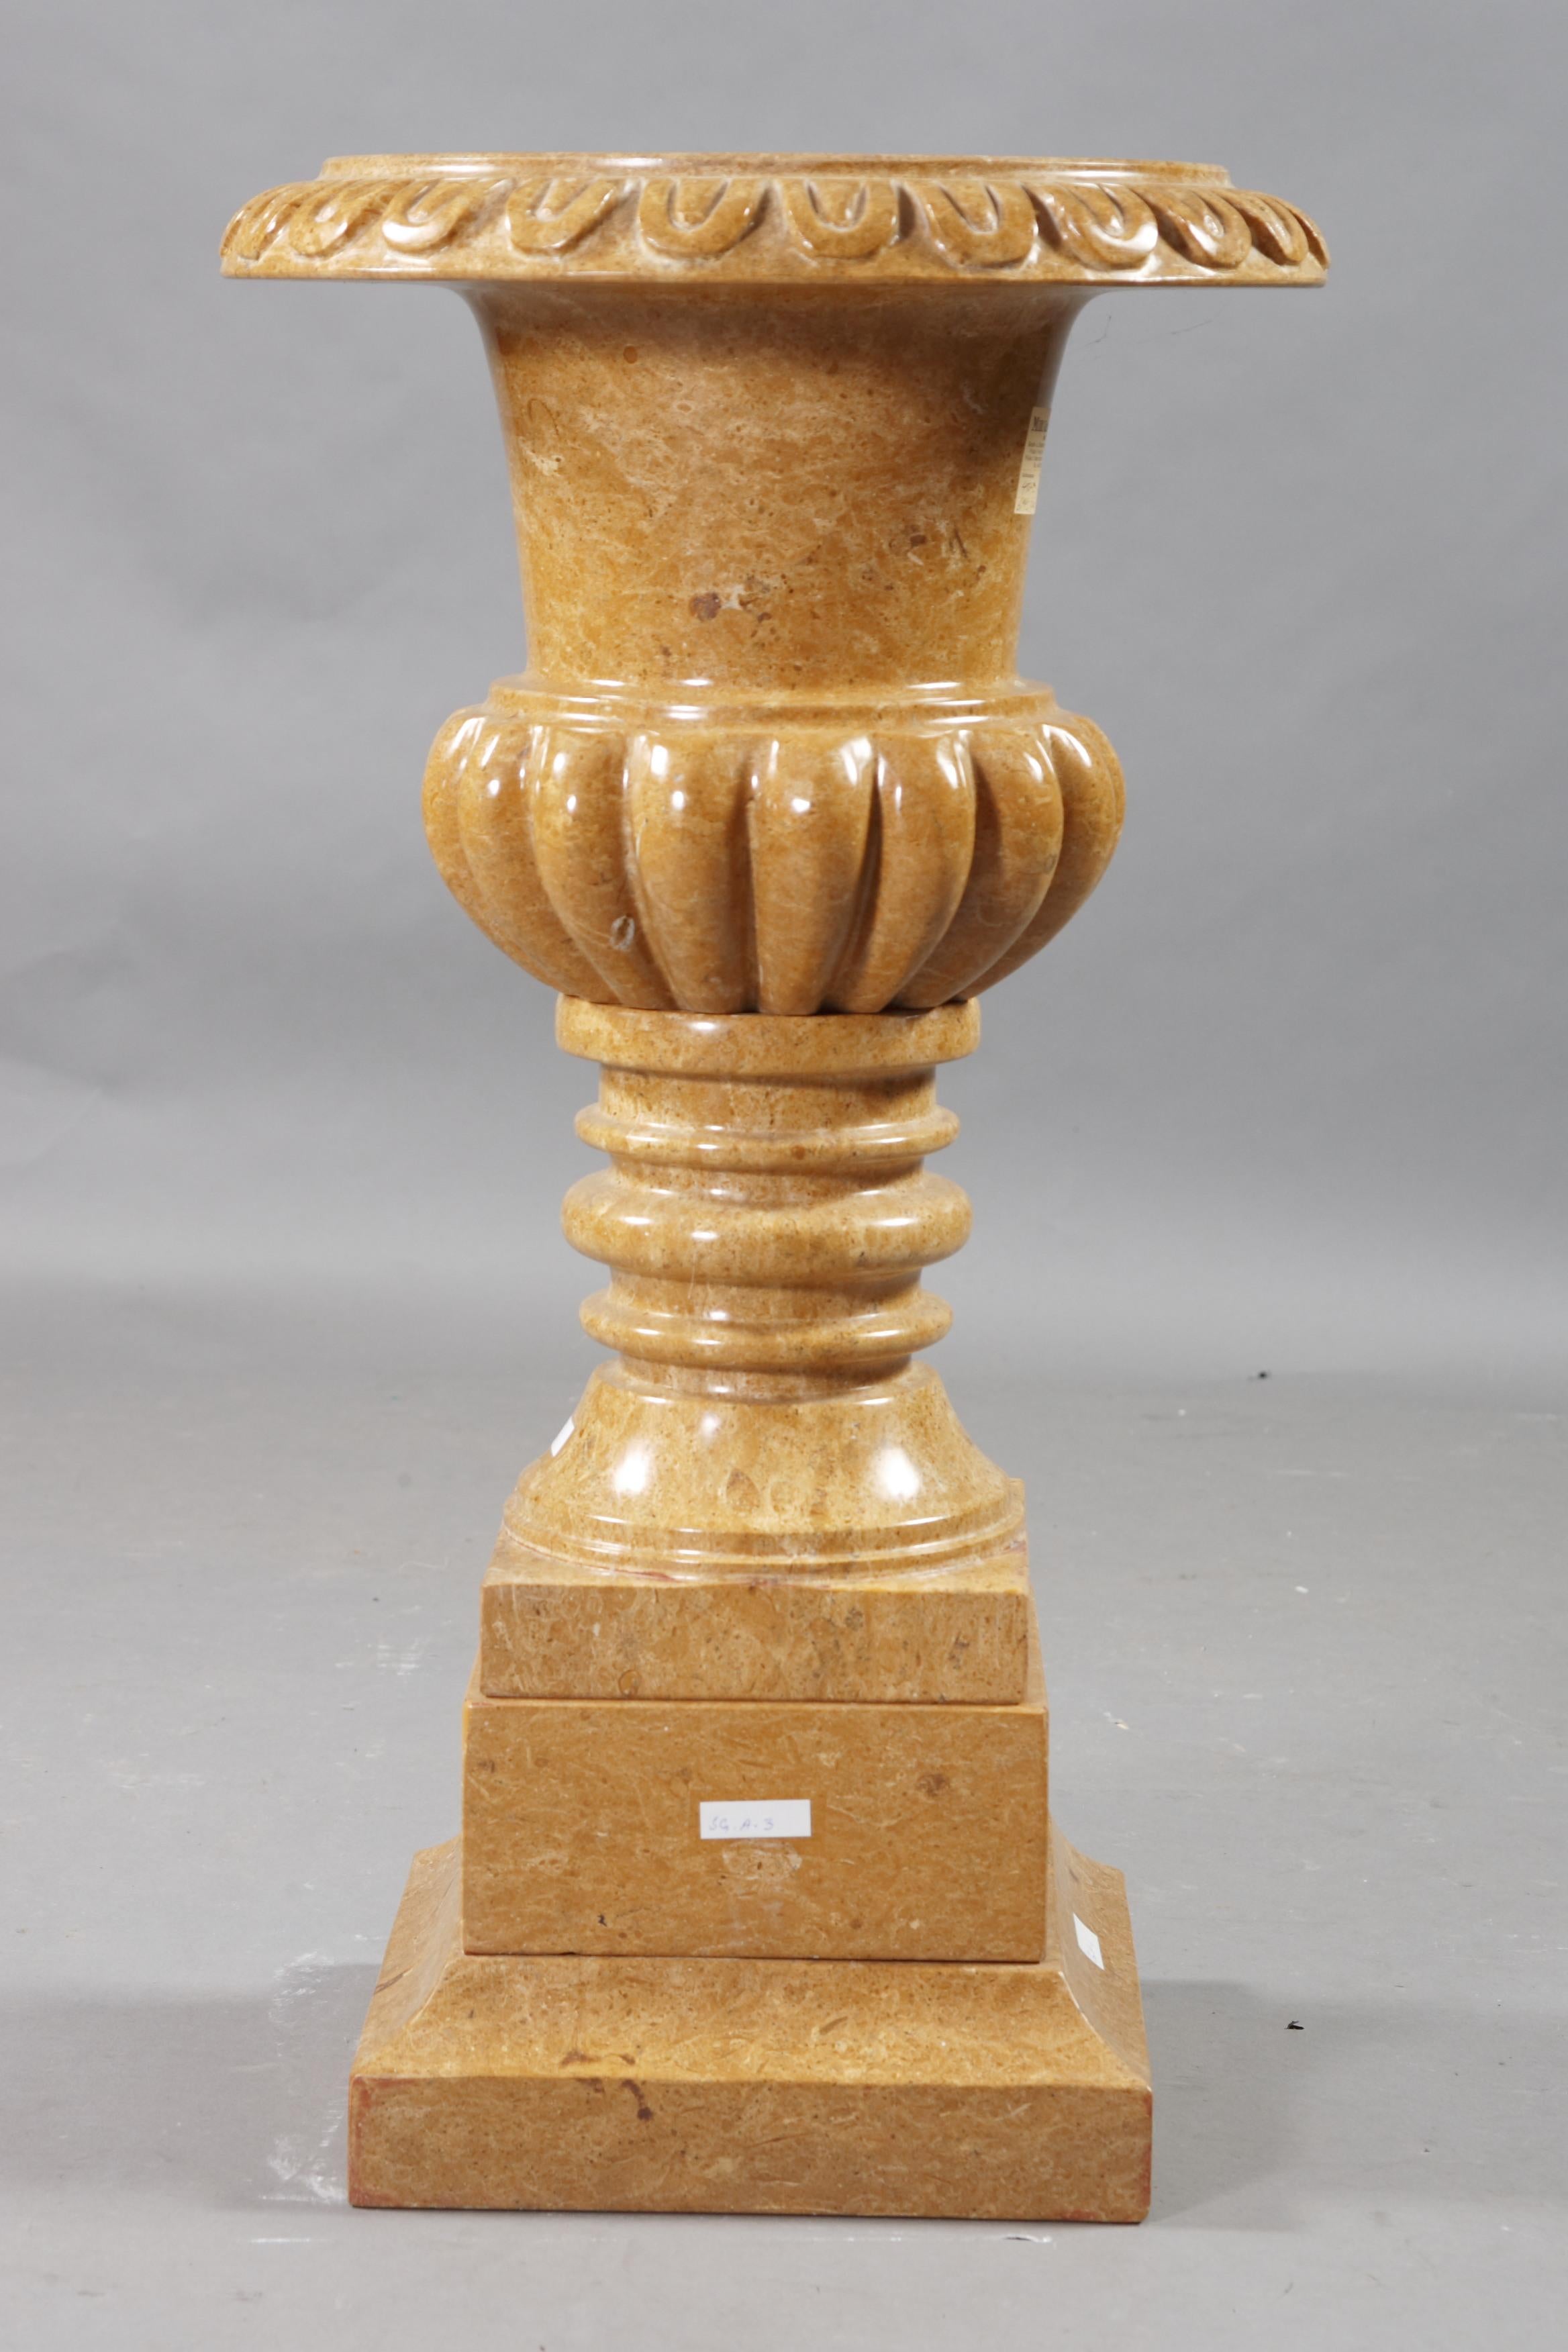 Decorative marble cratervase in the style of classicism natural marble in golden yellow. Quadrilateral going into curly shaft. Ovoider body slightly conically rising neck and wide, arched and decorated edge. The entire crater vase is handmade.